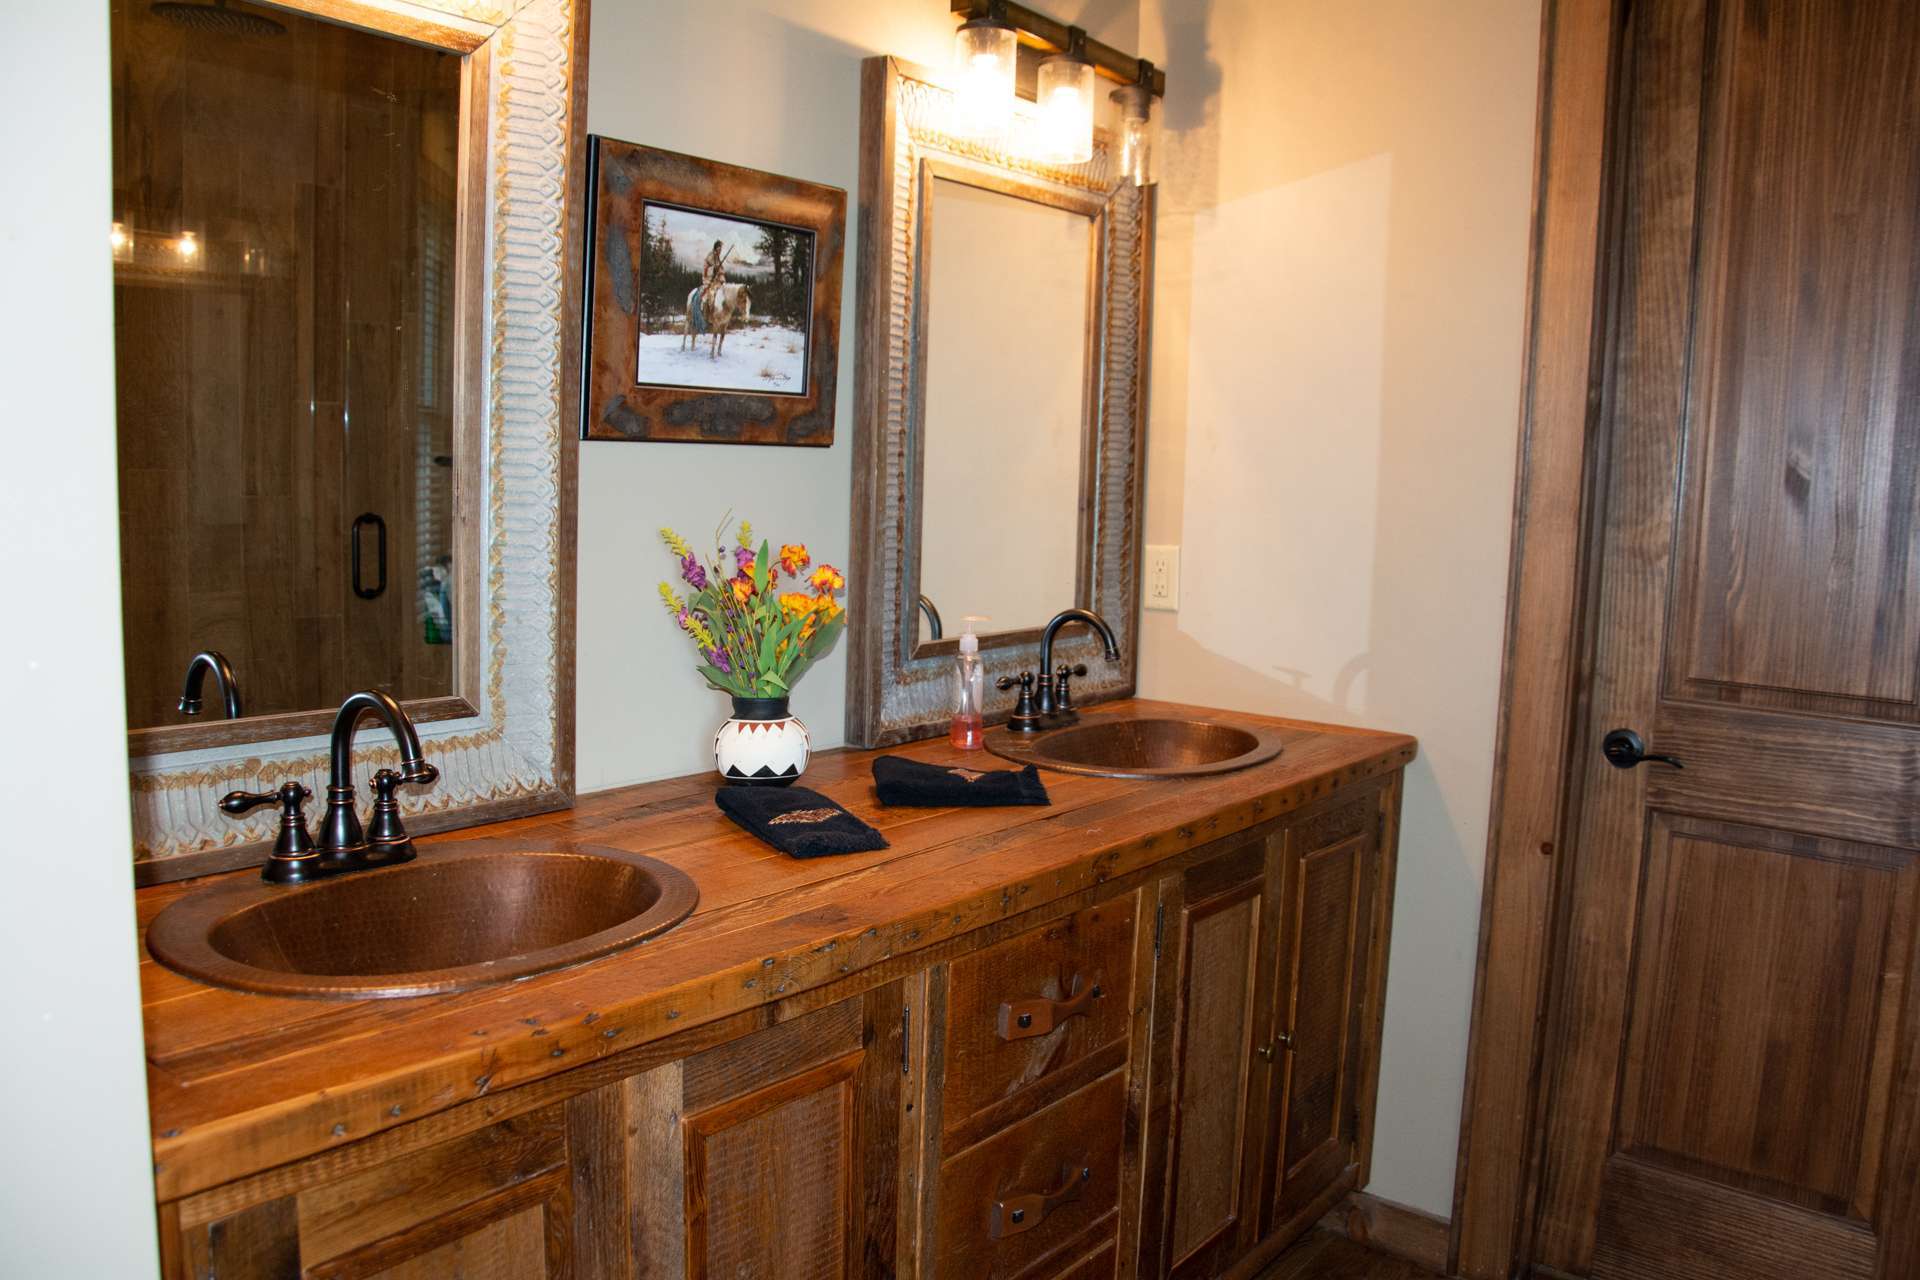 The master bath offers a double vanity with the hammered copper sinks, exposed beams and a separate tiled shower. A powder room and laundry room completes the main level.